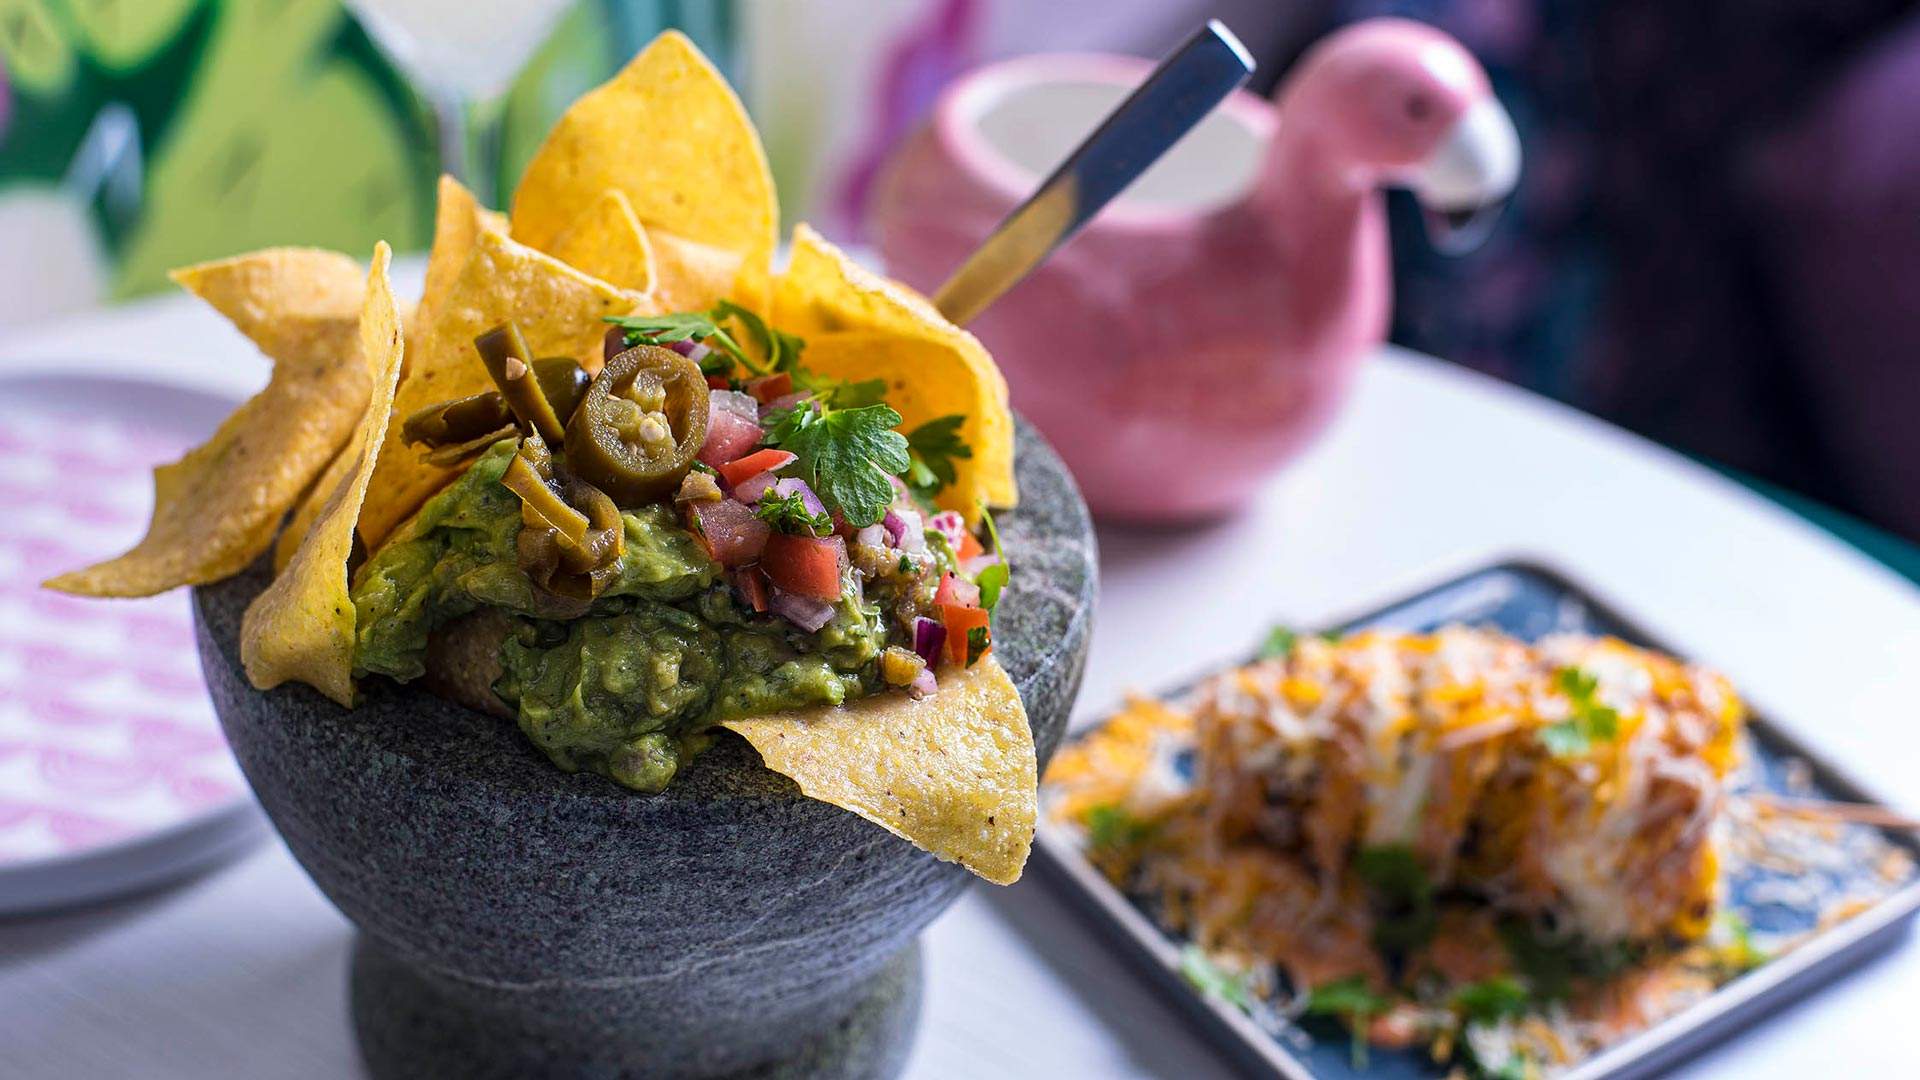 Don Pedros Is Paddington's Festive New Mexican Joint Serving Up All-You-Can-Eat Tacos